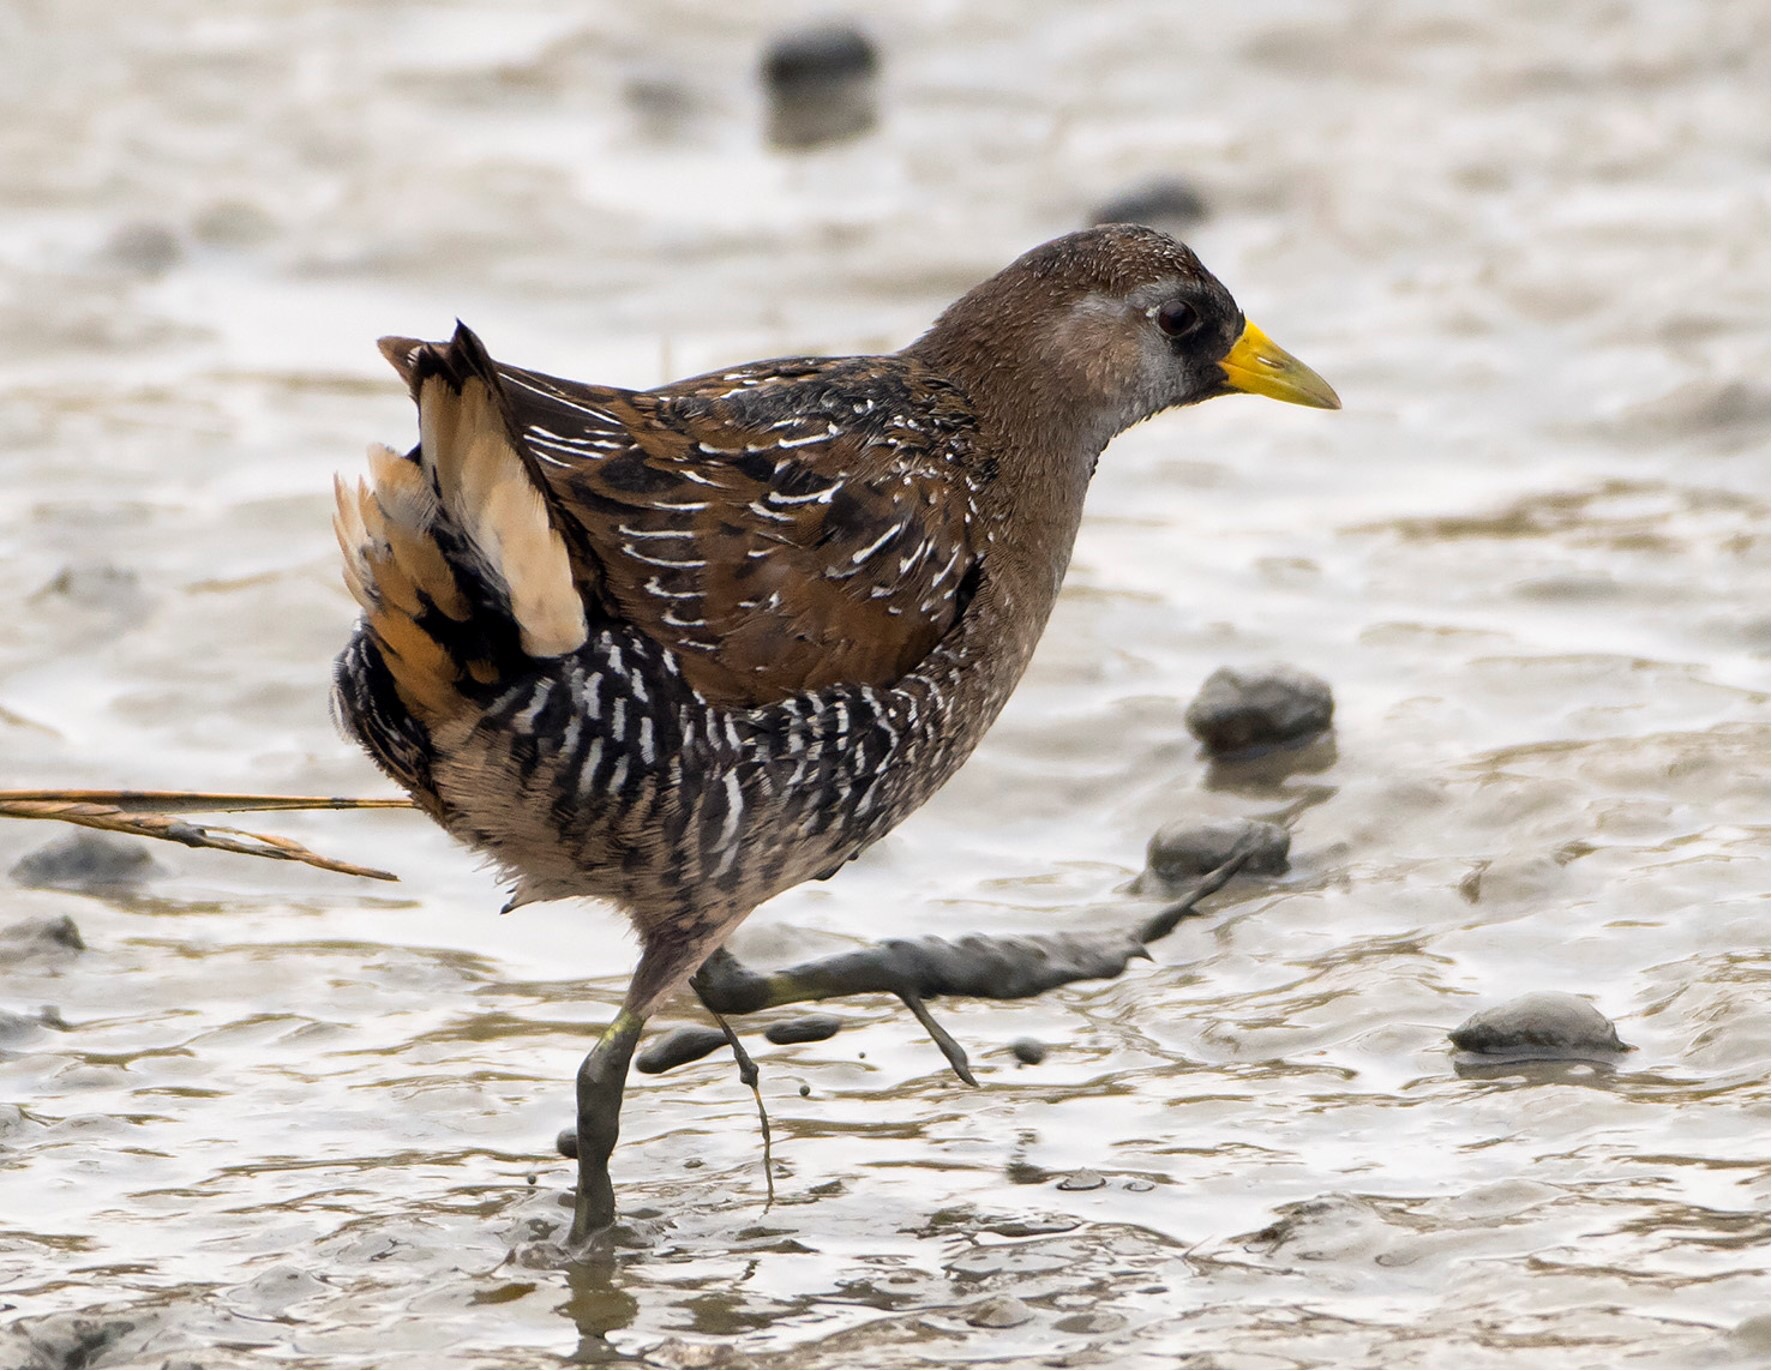 A Sora, a brown and grey bird with a yellow beak, is seen walking in shallow water